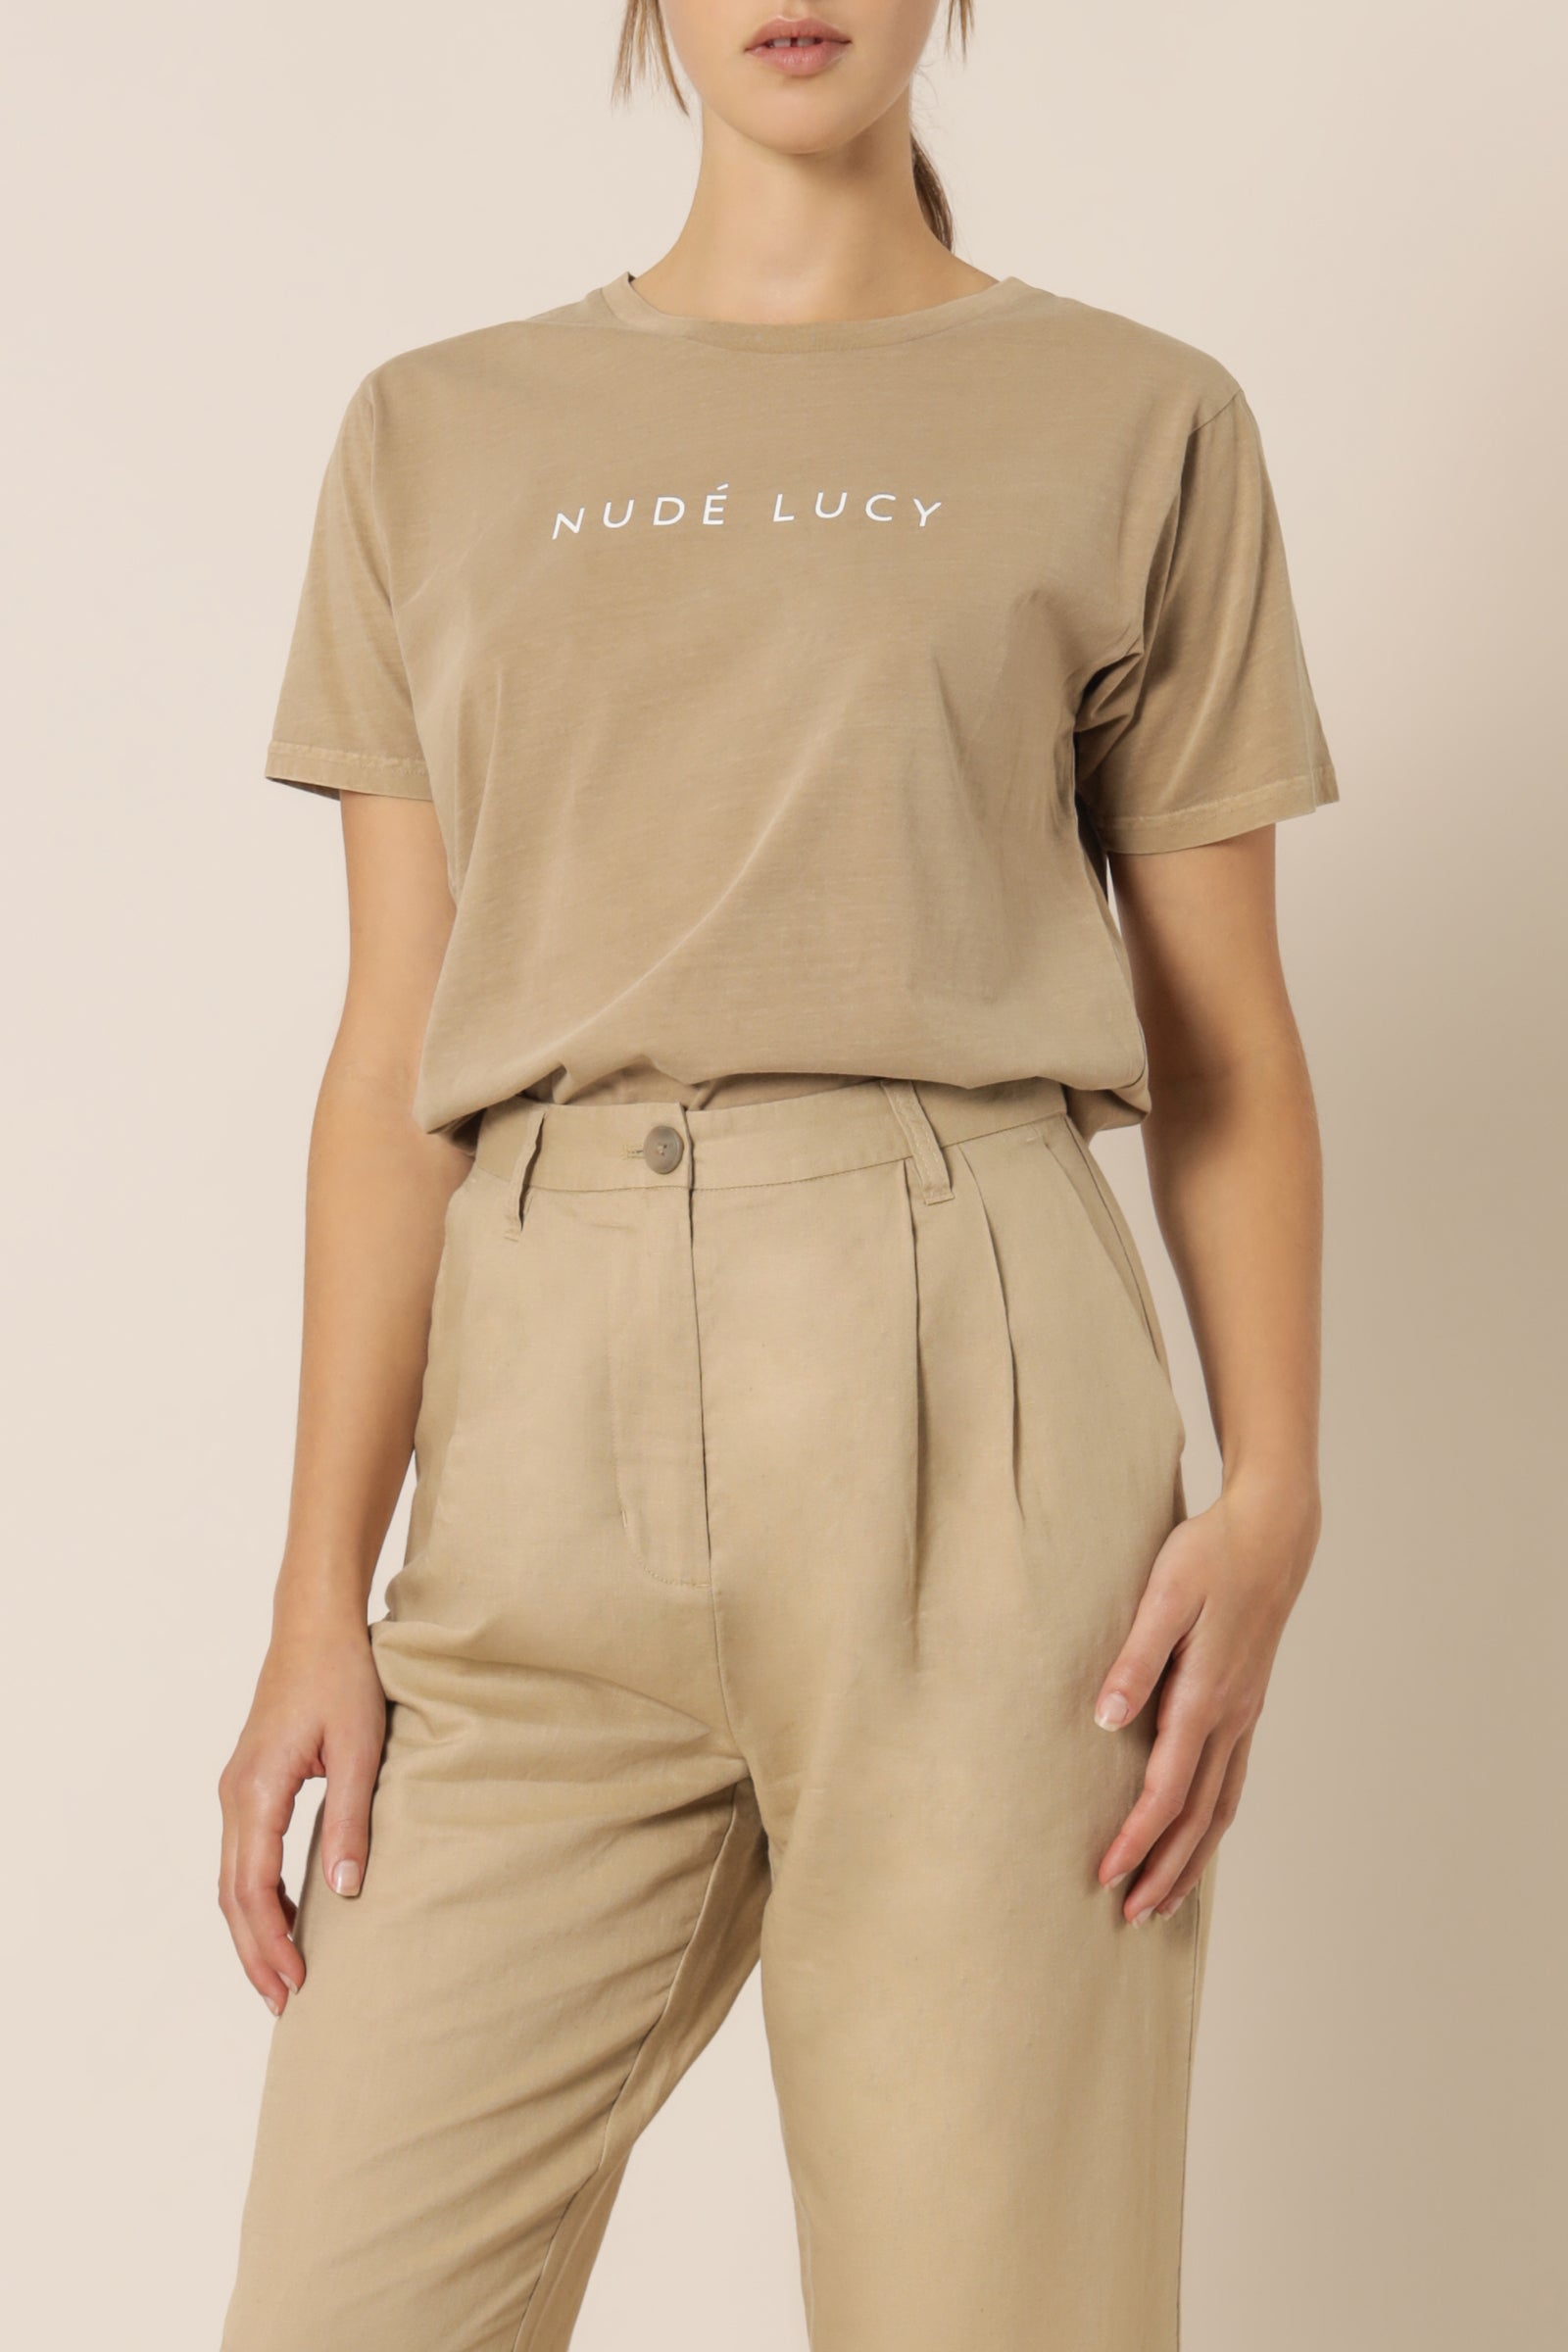 Nude Lucy Nude Lucy Washed Slogan Tee Tan Top 